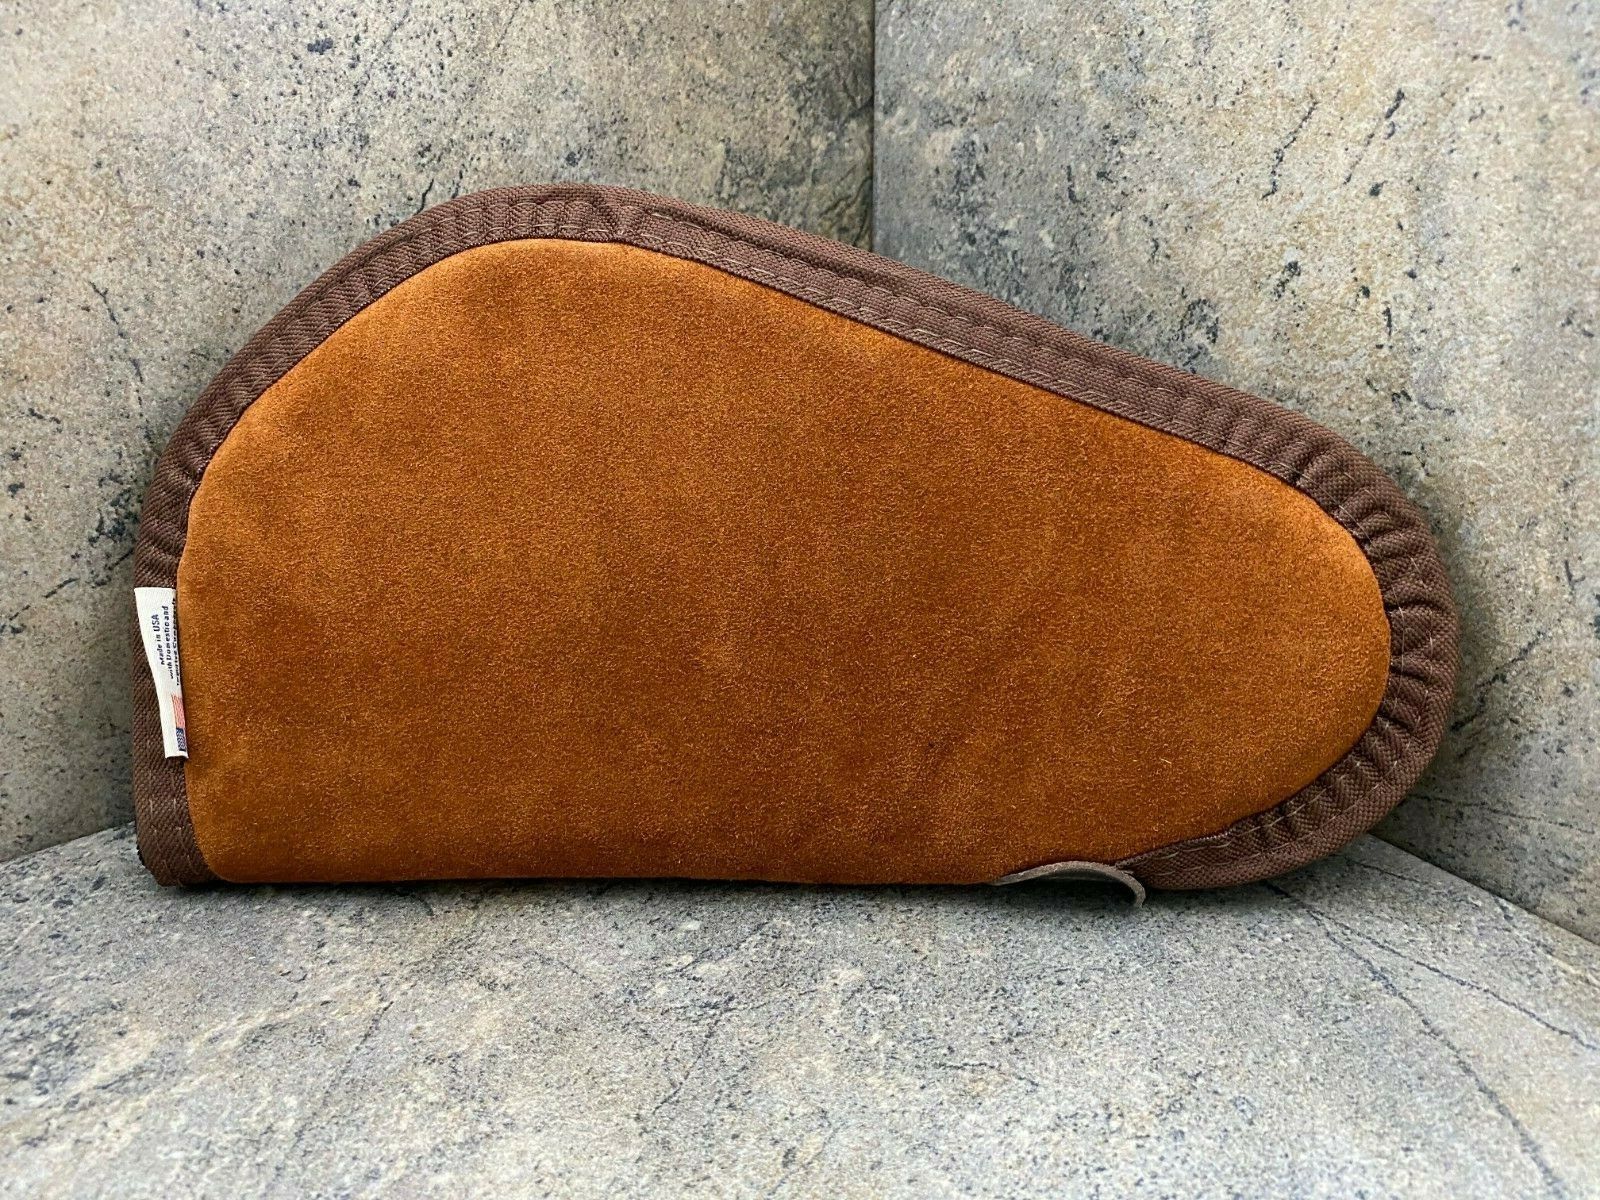 New Allen Suede Leather Pistol Case 11" 86-11 Made in USA